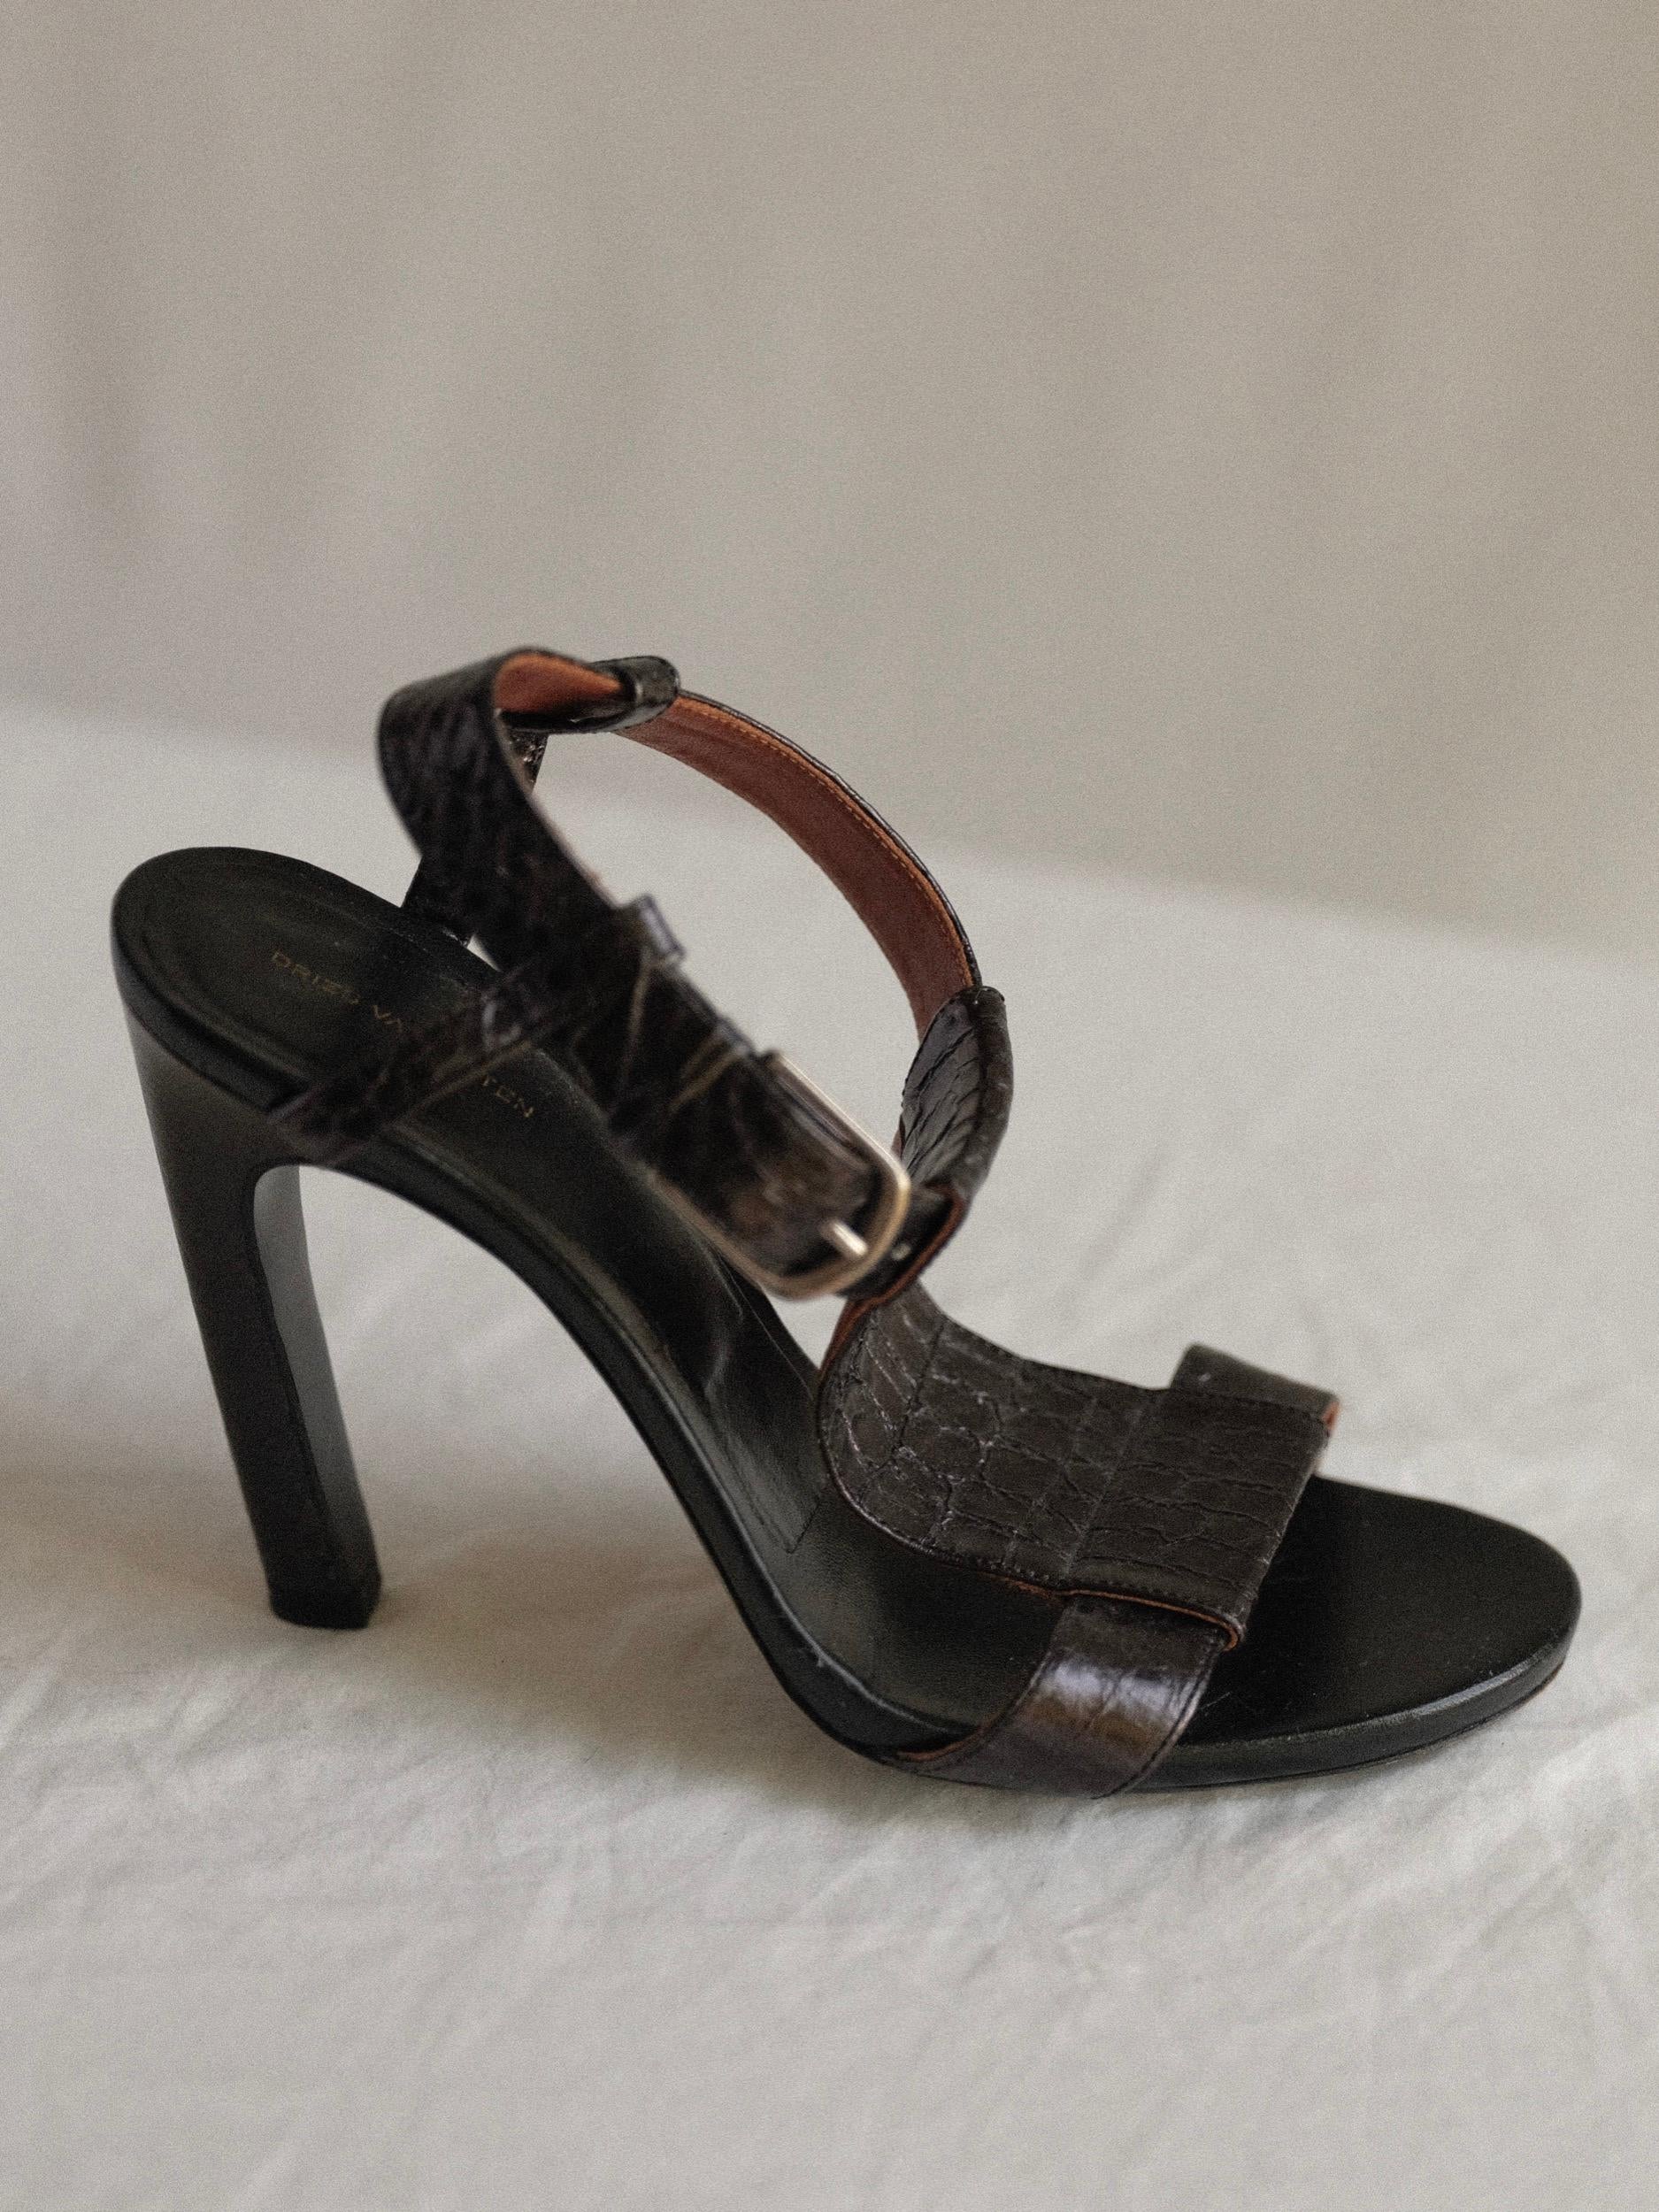 Dries Van Noten Embossed Leather T-Strap Curved Heel Size 37 In Good Condition For Sale In Los Angeles, CA